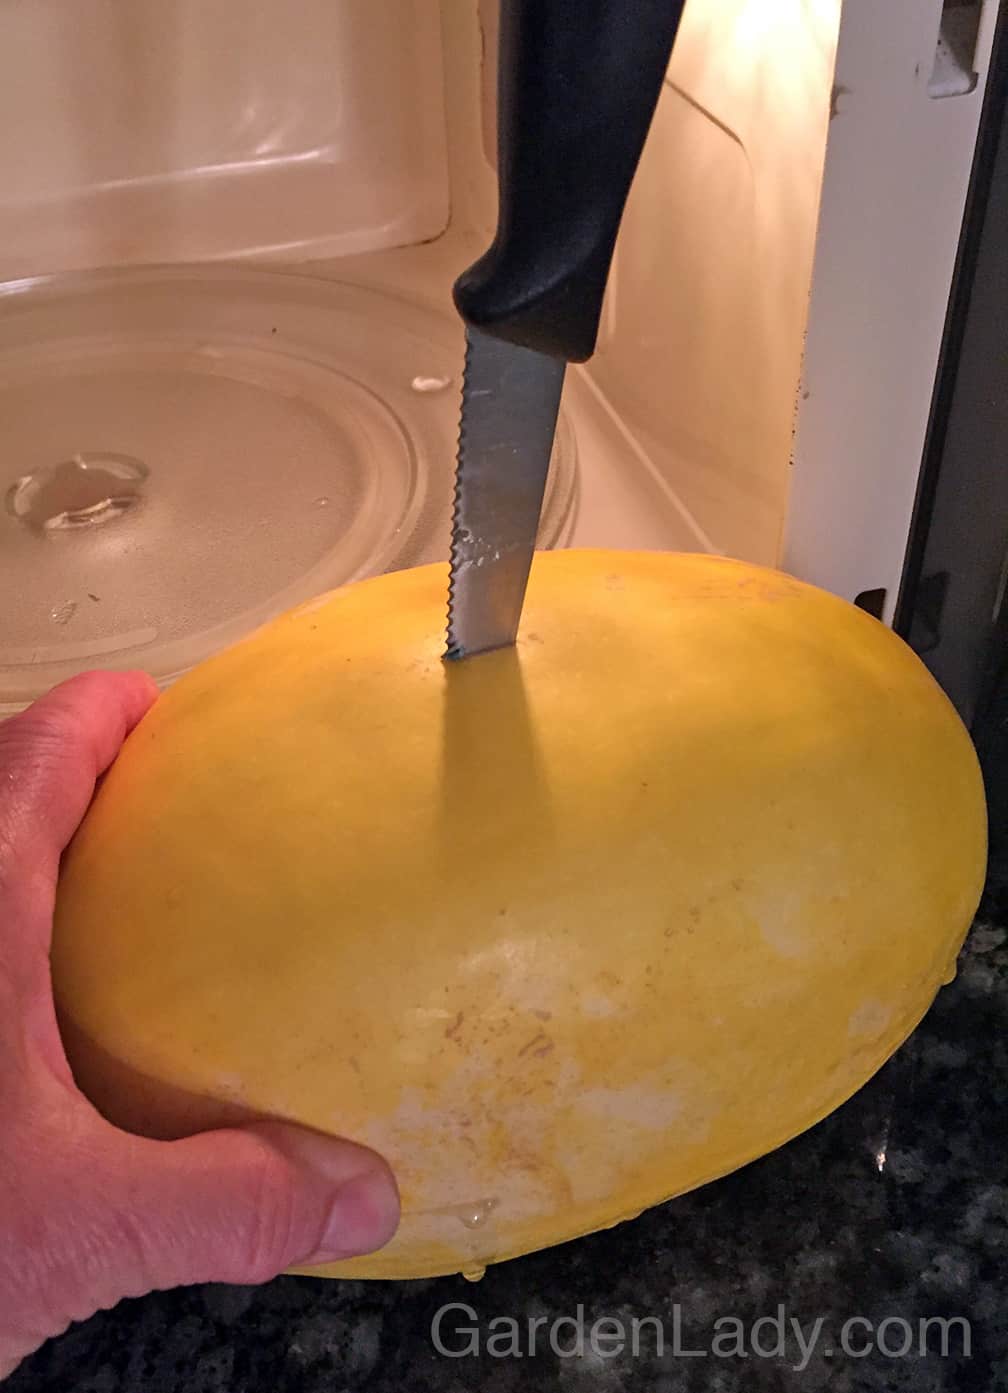 Pierce the squash with a knife in at least 3 places. Then it's less likely that it will explode in the microwave. There's still a slight chance....but less likely.